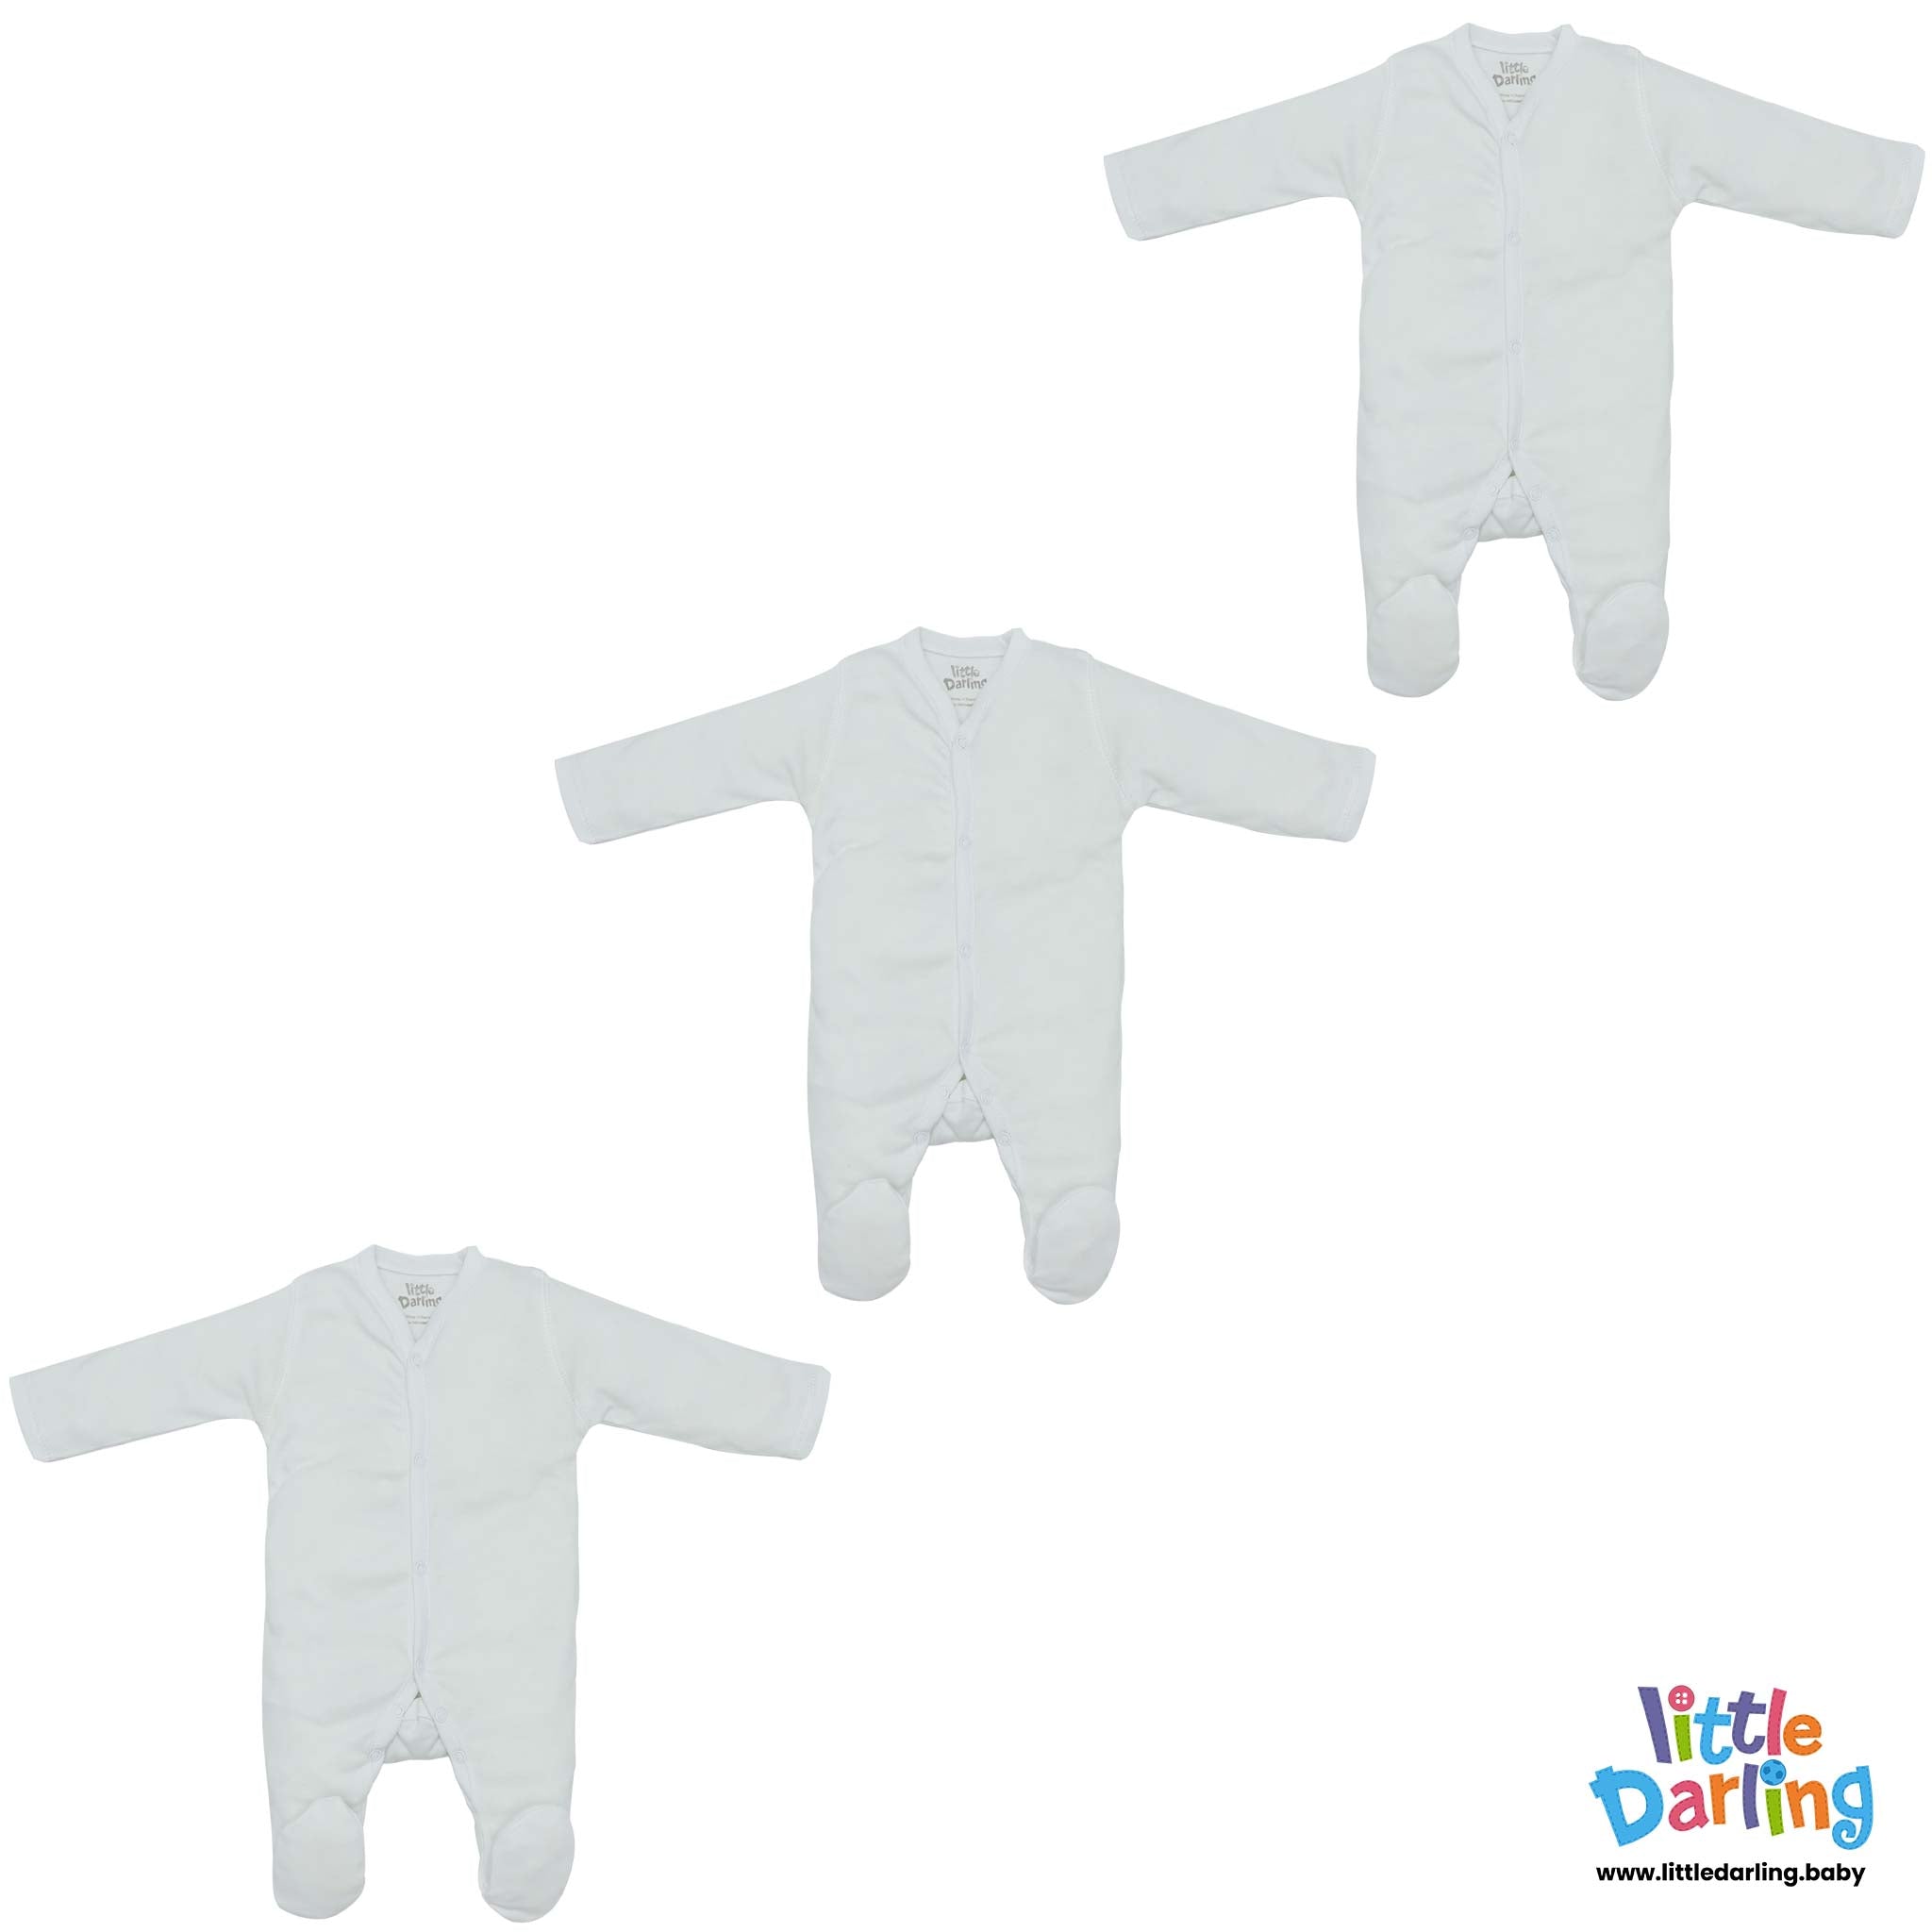 Baby Sleepsuit White Color by Little Darling